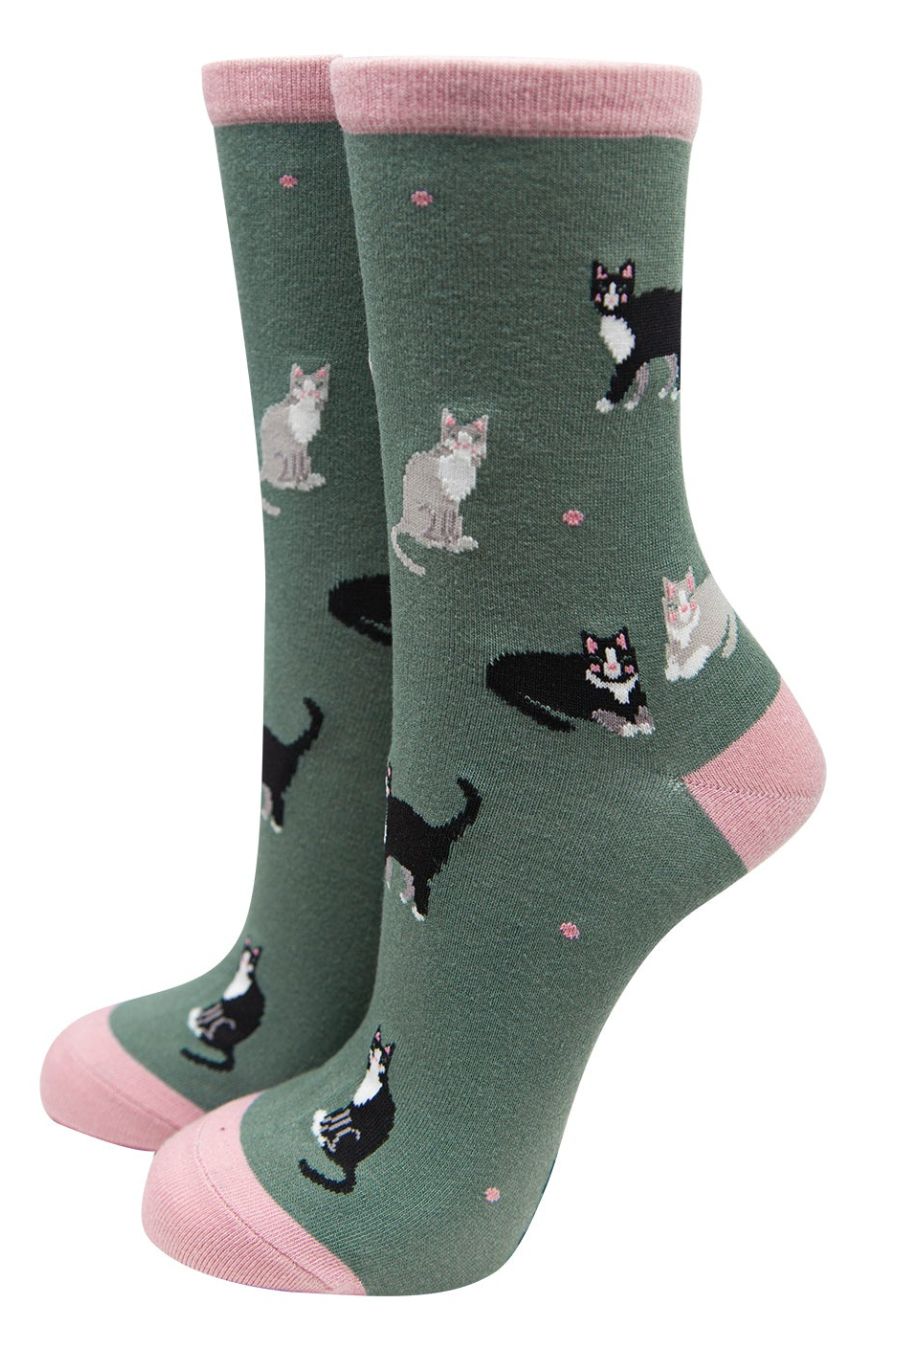 green bamboo ankle socks with grey and black cats